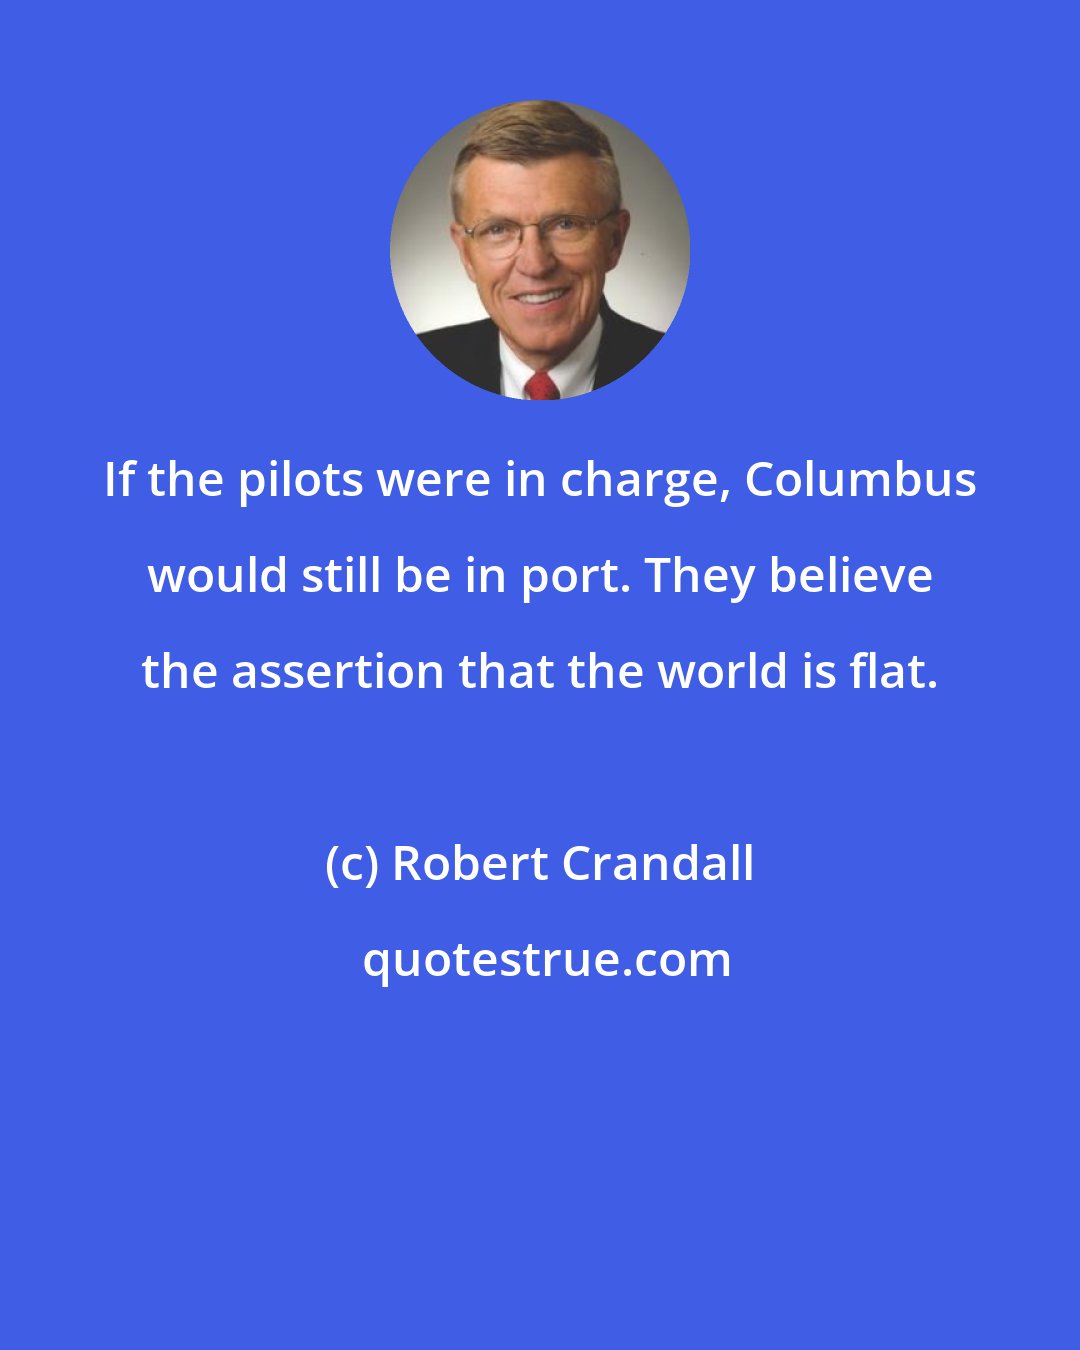 Robert Crandall: If the pilots were in charge, Columbus would still be in port. They believe the assertion that the world is flat.